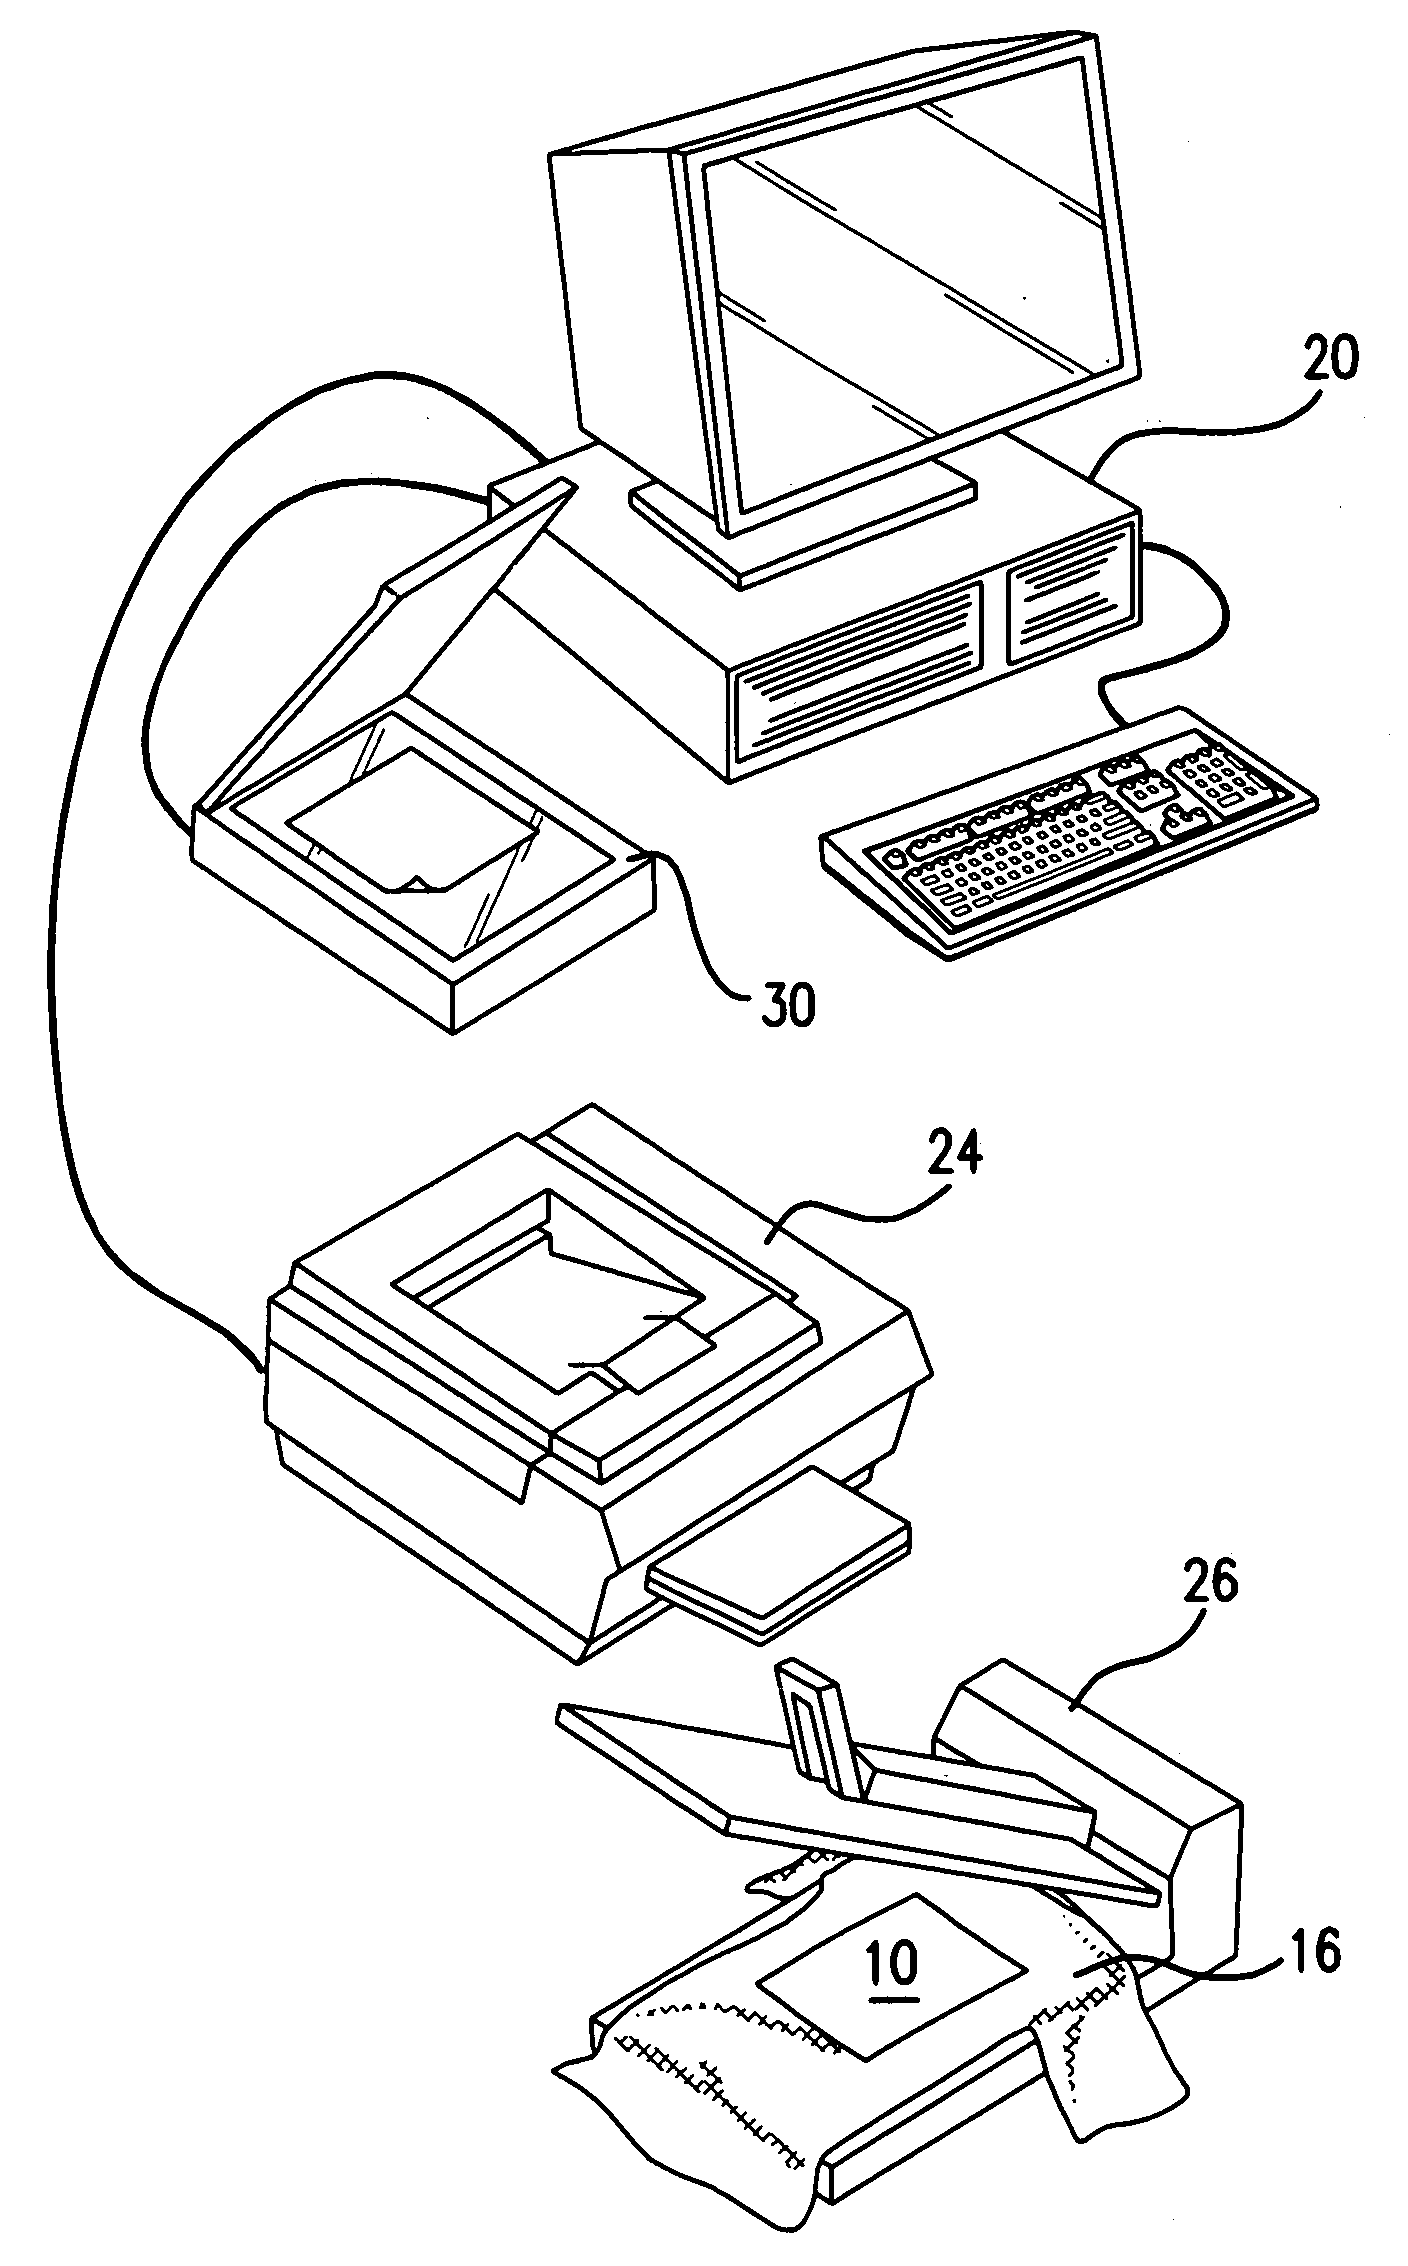 Image receiver media and printing process